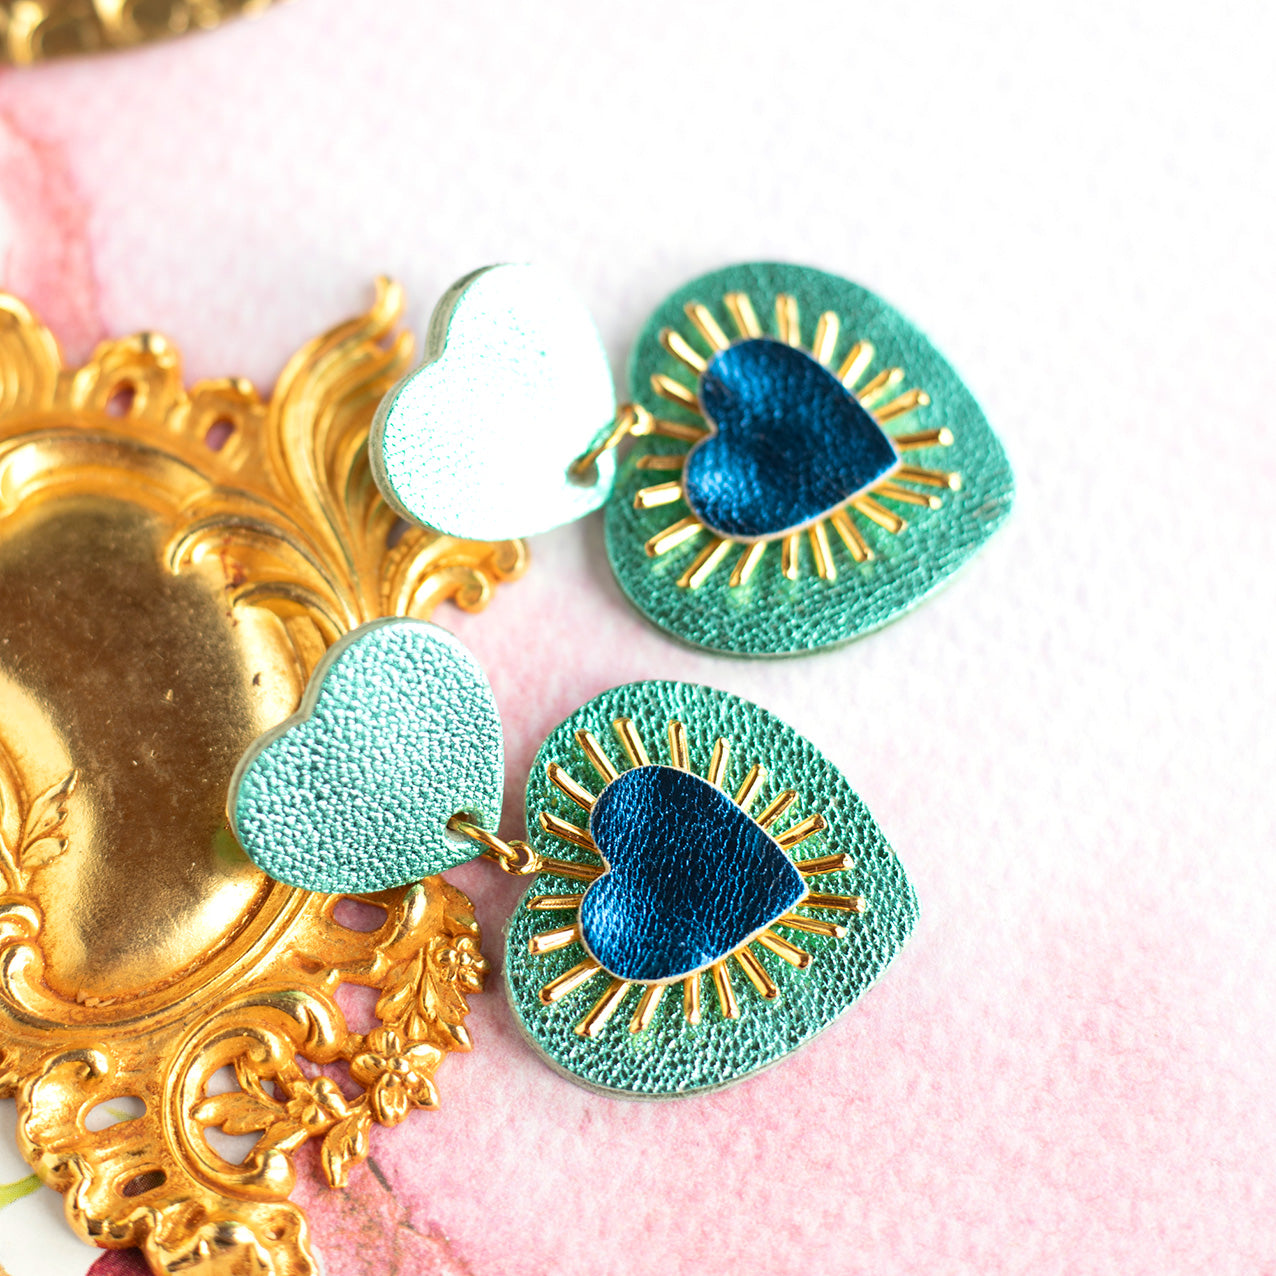 Sacré Coeur earrings in metallic turquoise and royal blue leather